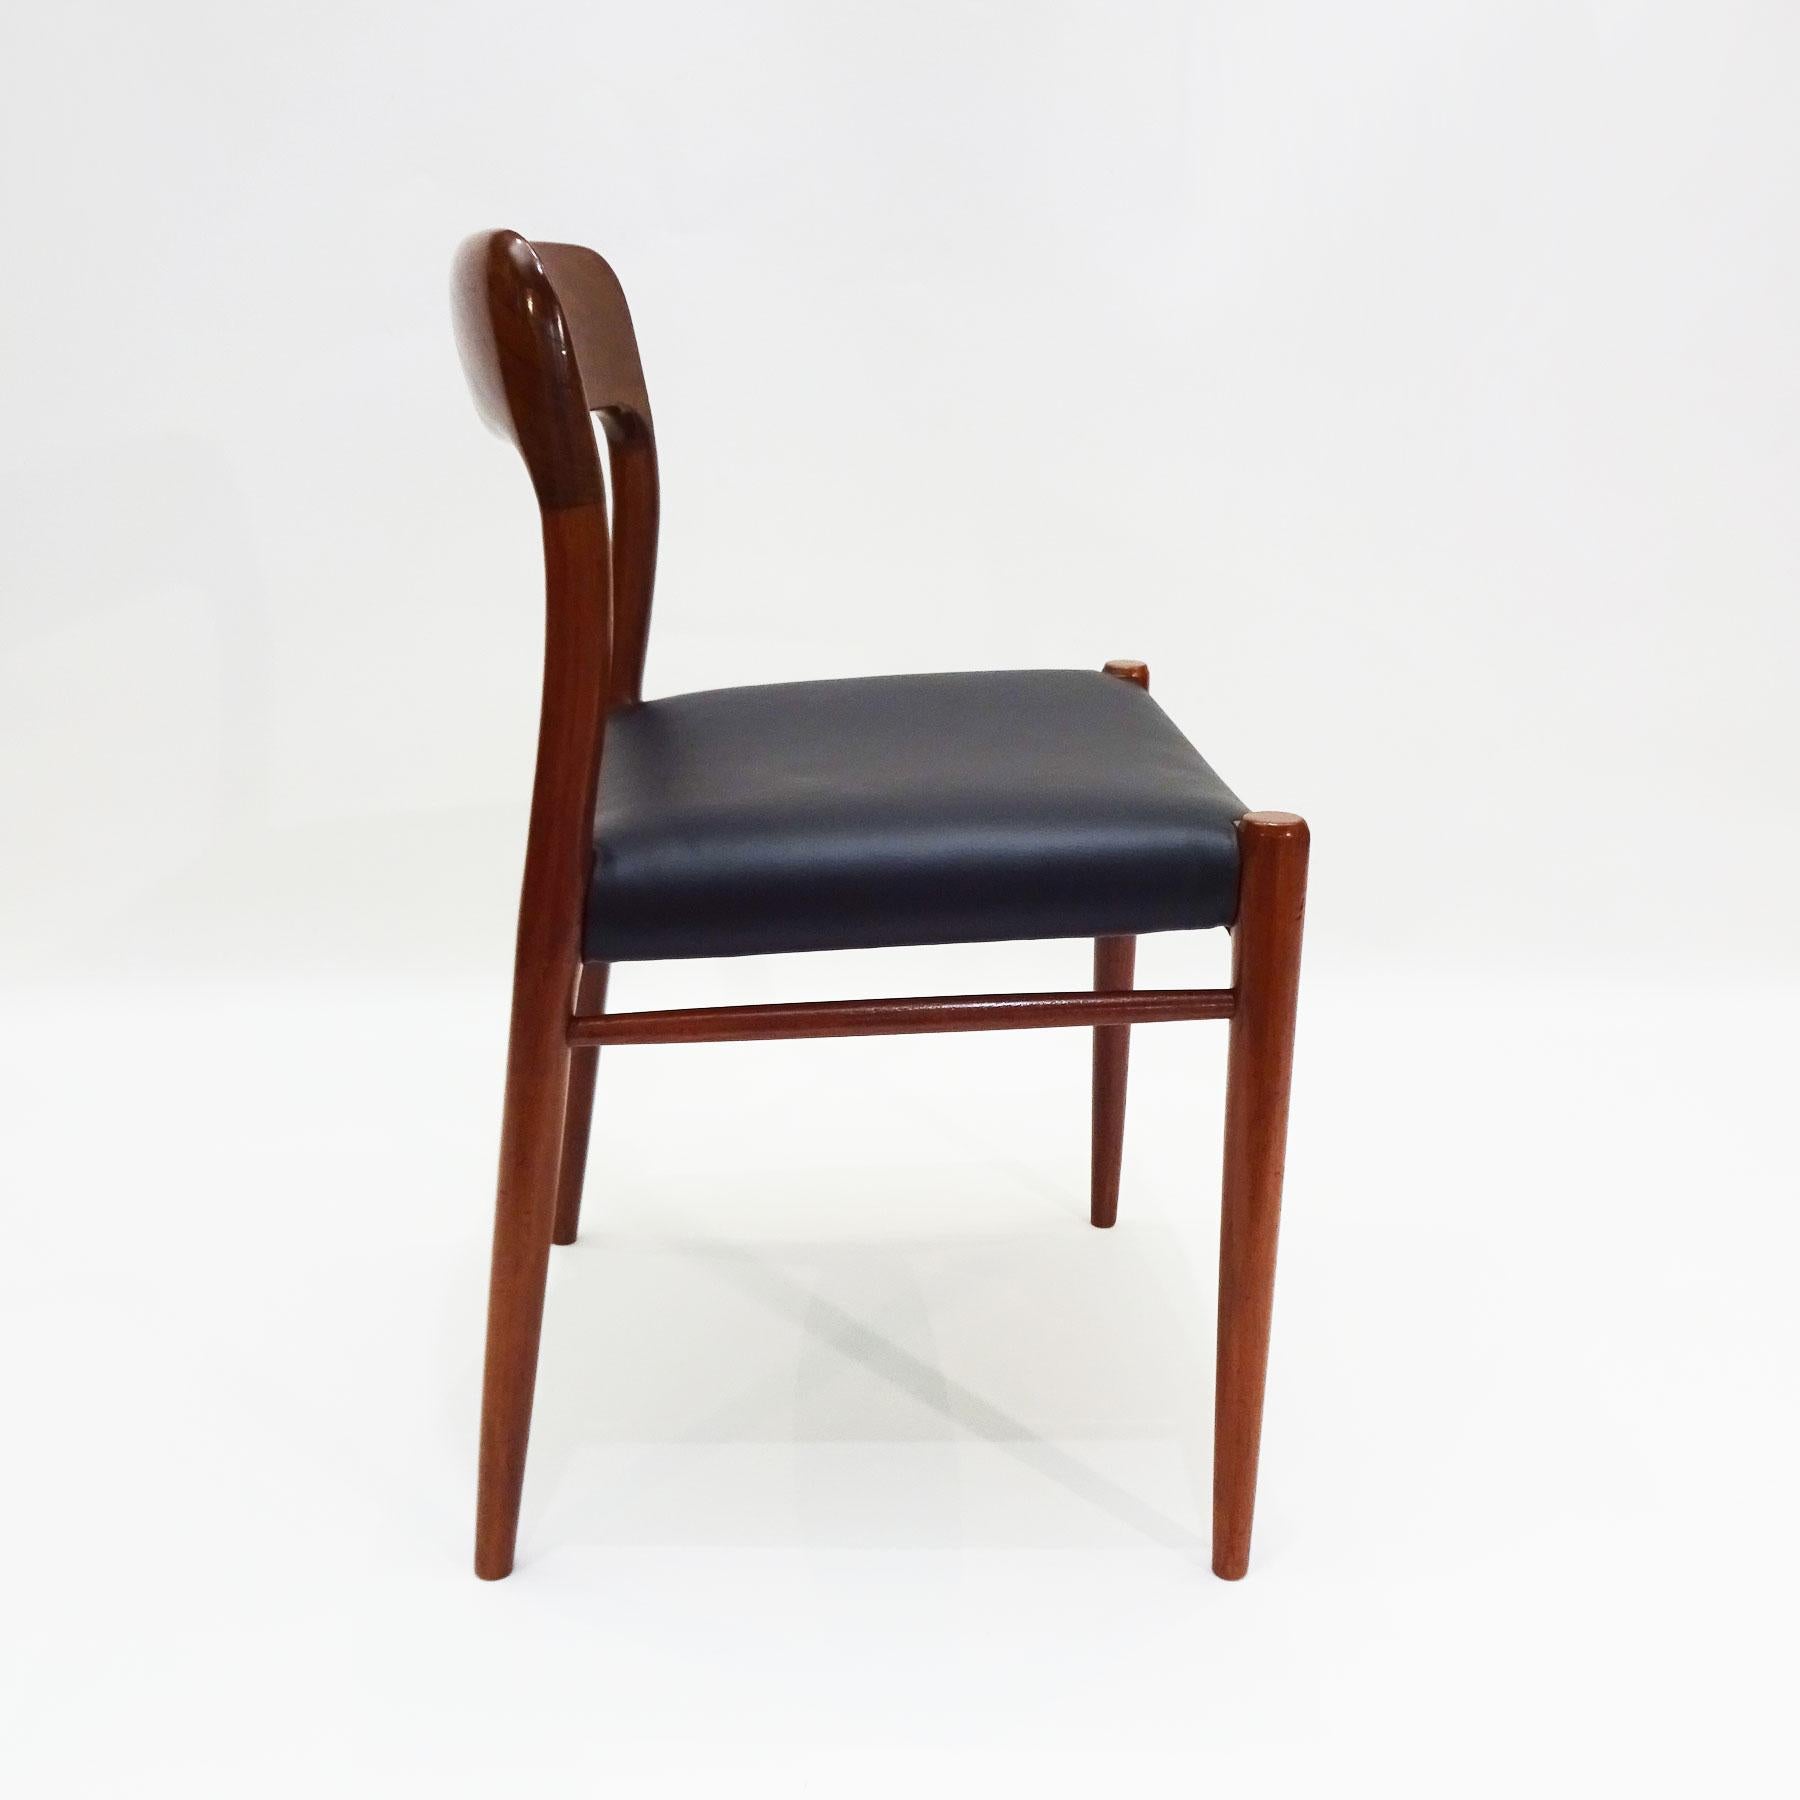 Danish midcentury Niels O.Møller teak and black leather model 75 desk, side or accent chair for JL. Møllers.

Niels Otto Møller stands out as one of the greats of Danish midcentury design and was especially known for the numerous chairs he